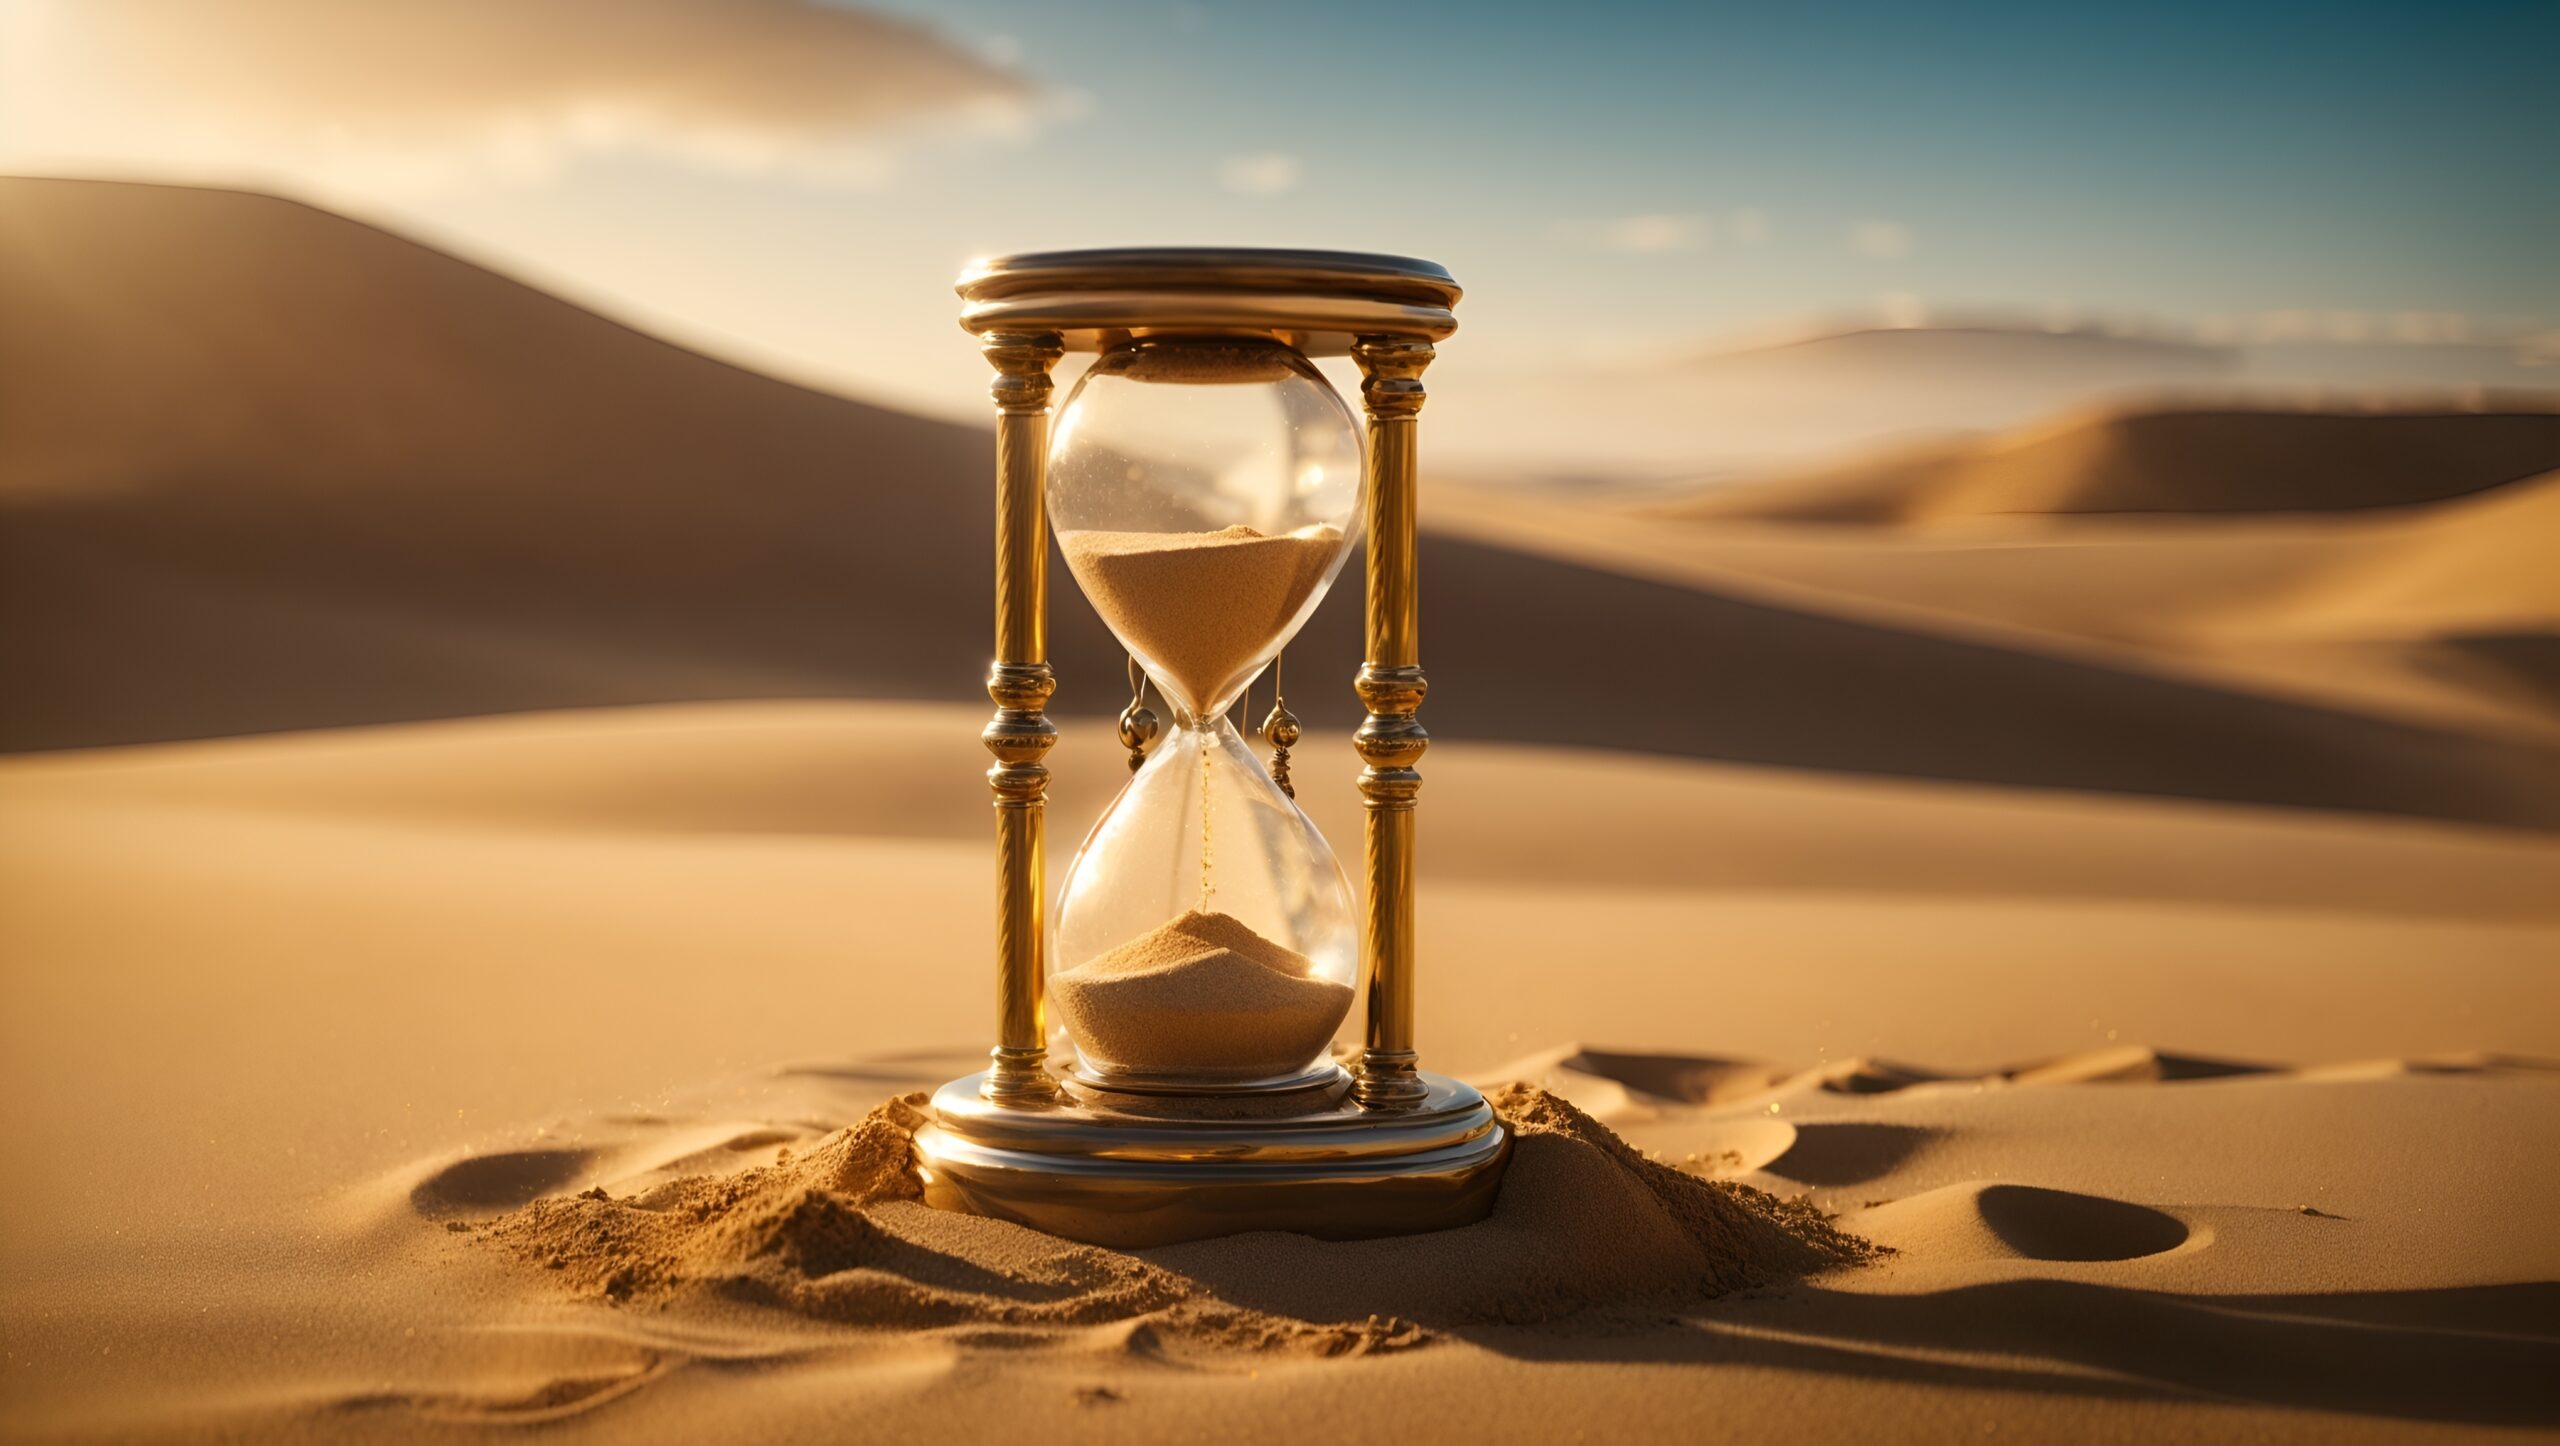 An ornate hourglass, its sand suspended in time.